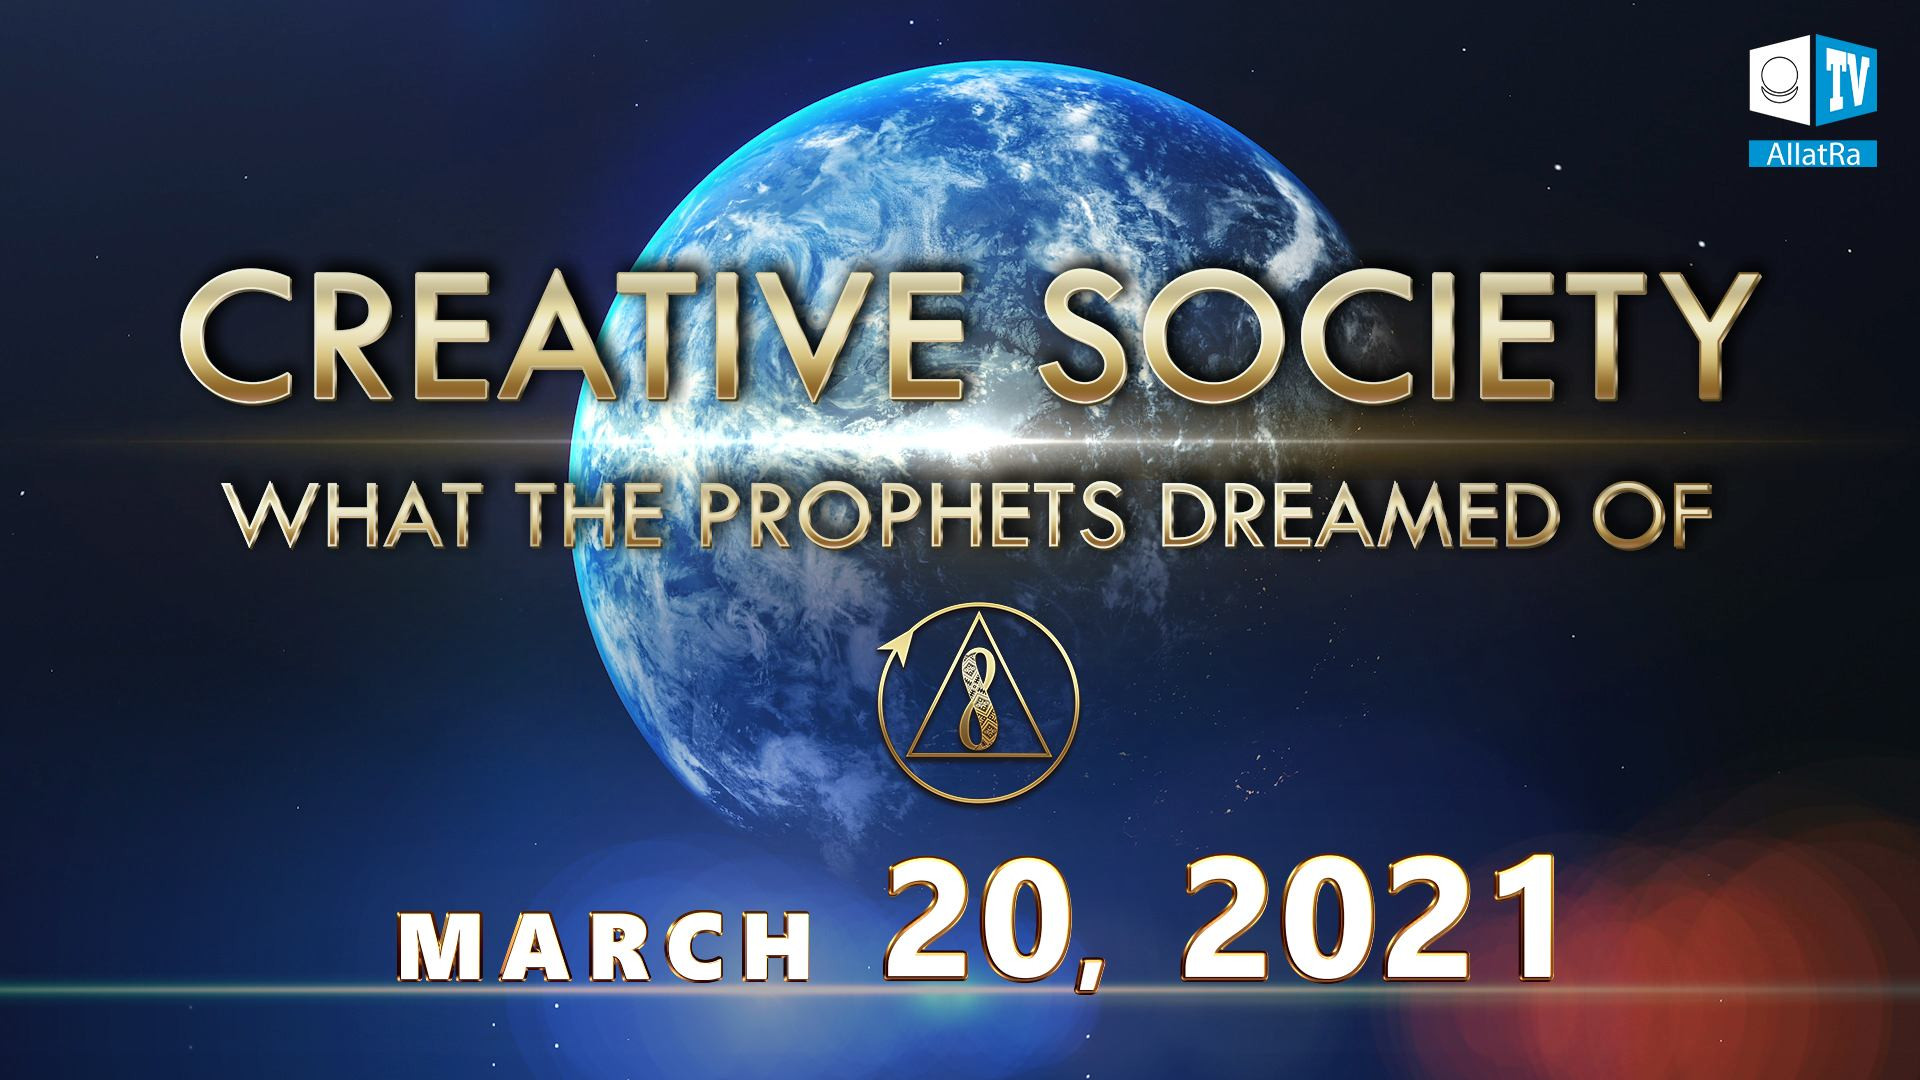 Creative Society. What the prophets dreamed of. TRAILER. March 20, 2021. Global Online Conference